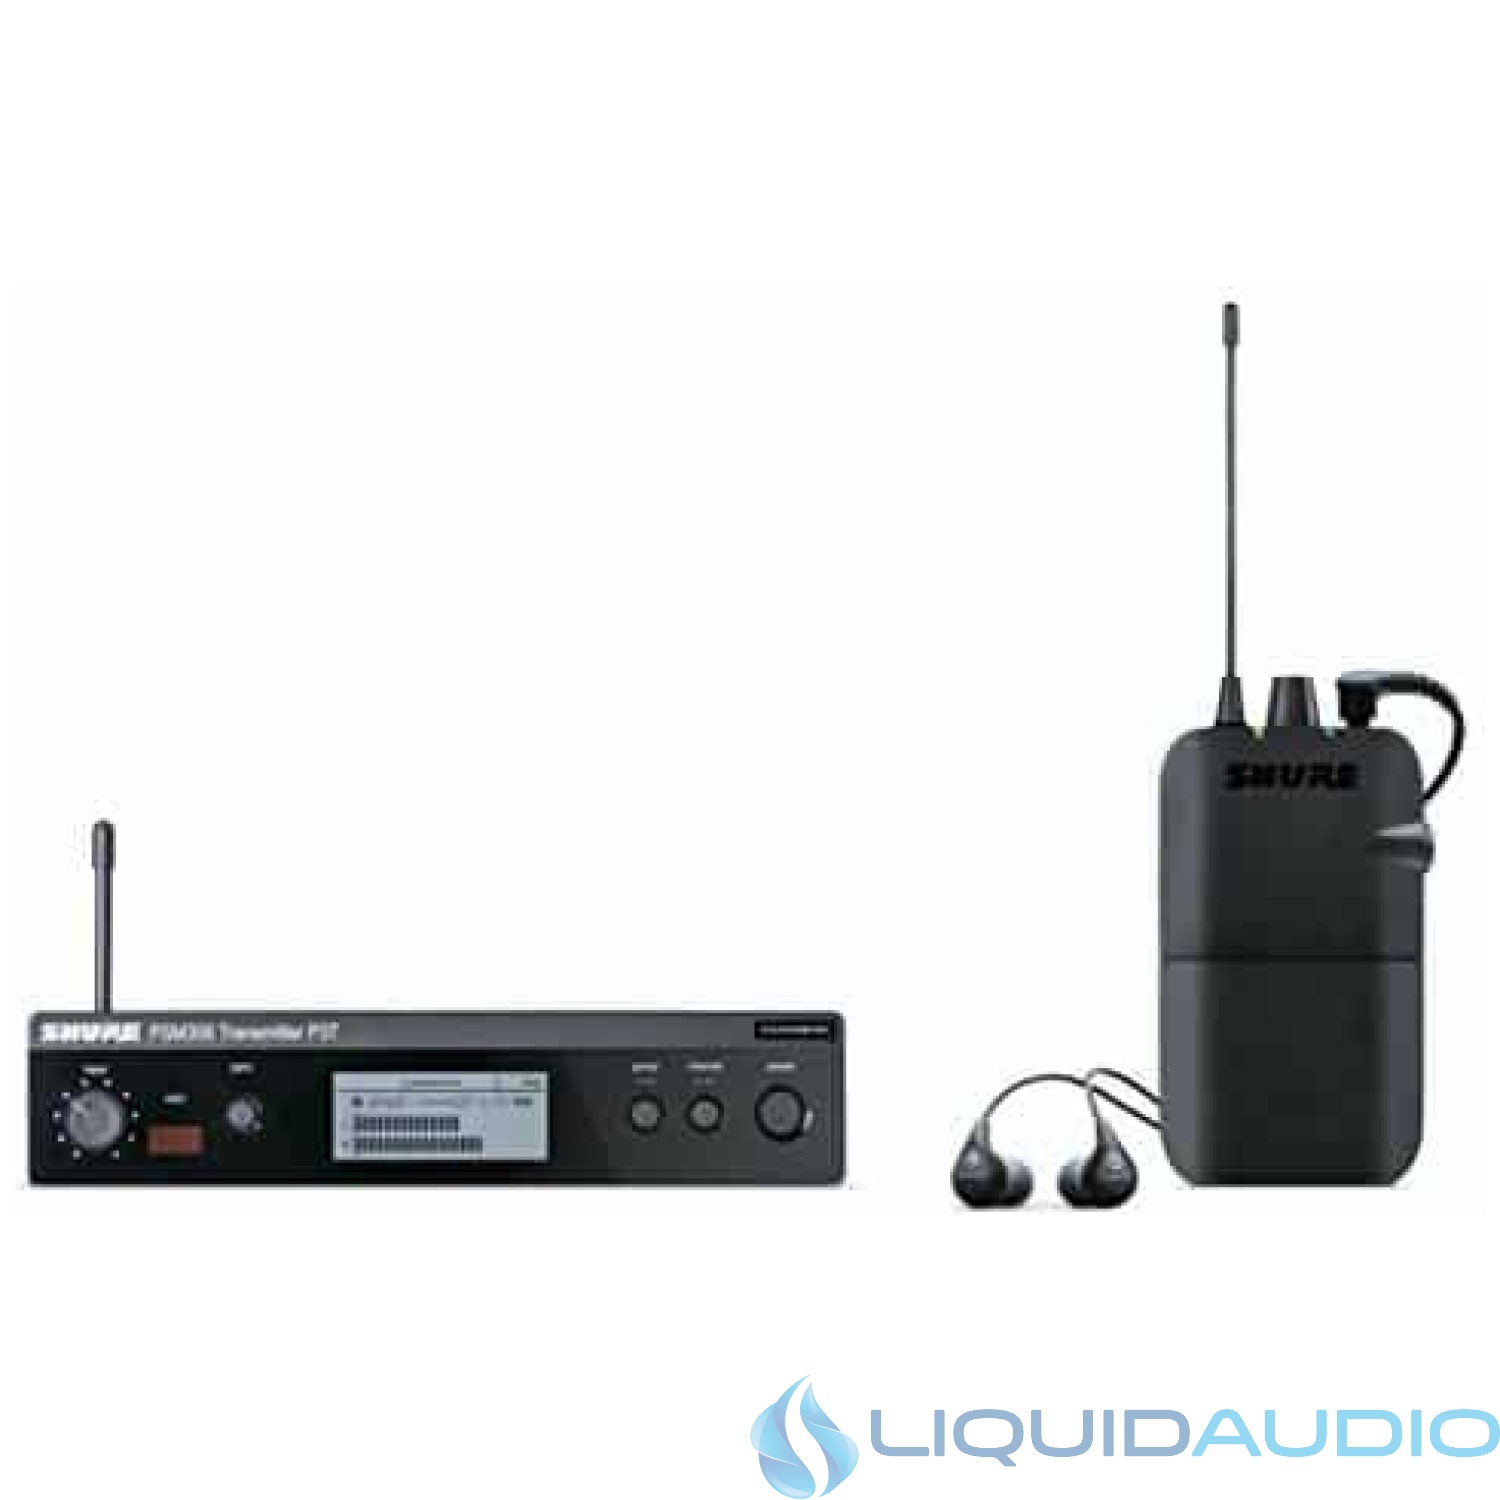 Shure P3TR112GR PSM300 Wireless Stereo Personal Monitor System with SE112-GR Earphones, G20